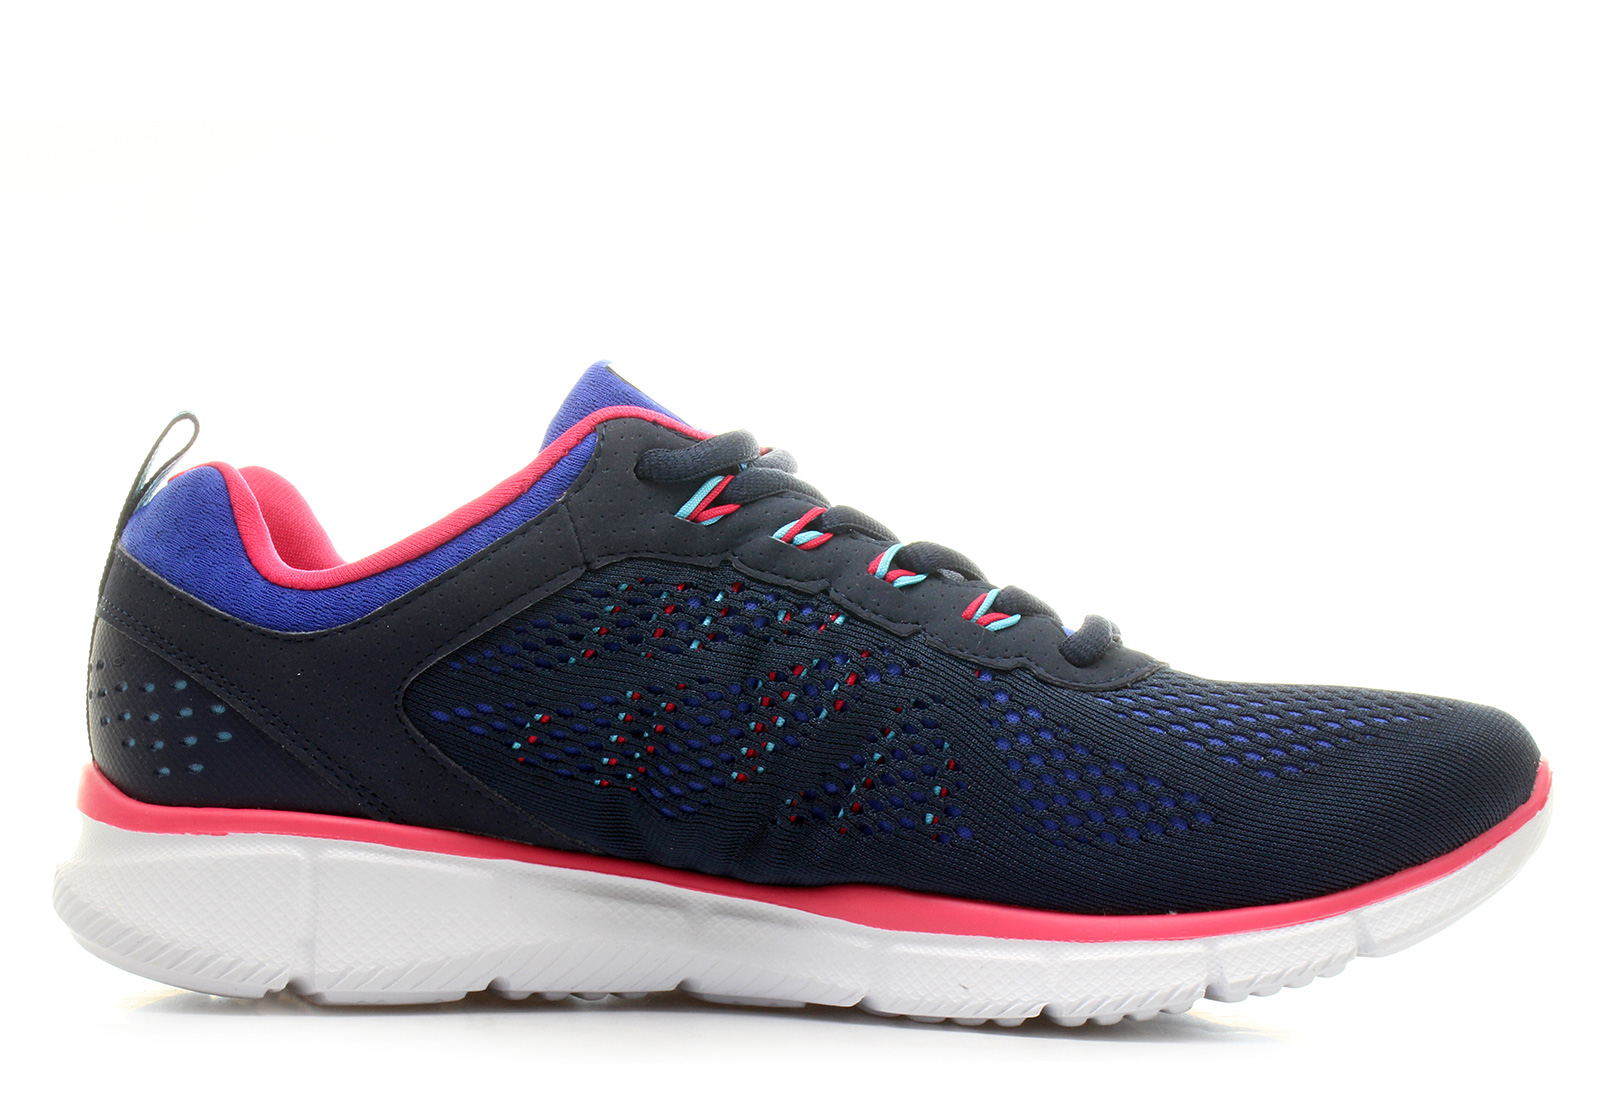 Skechers Shoes - New Milestone - 11897-NVBL - Online shop for sneakers ...